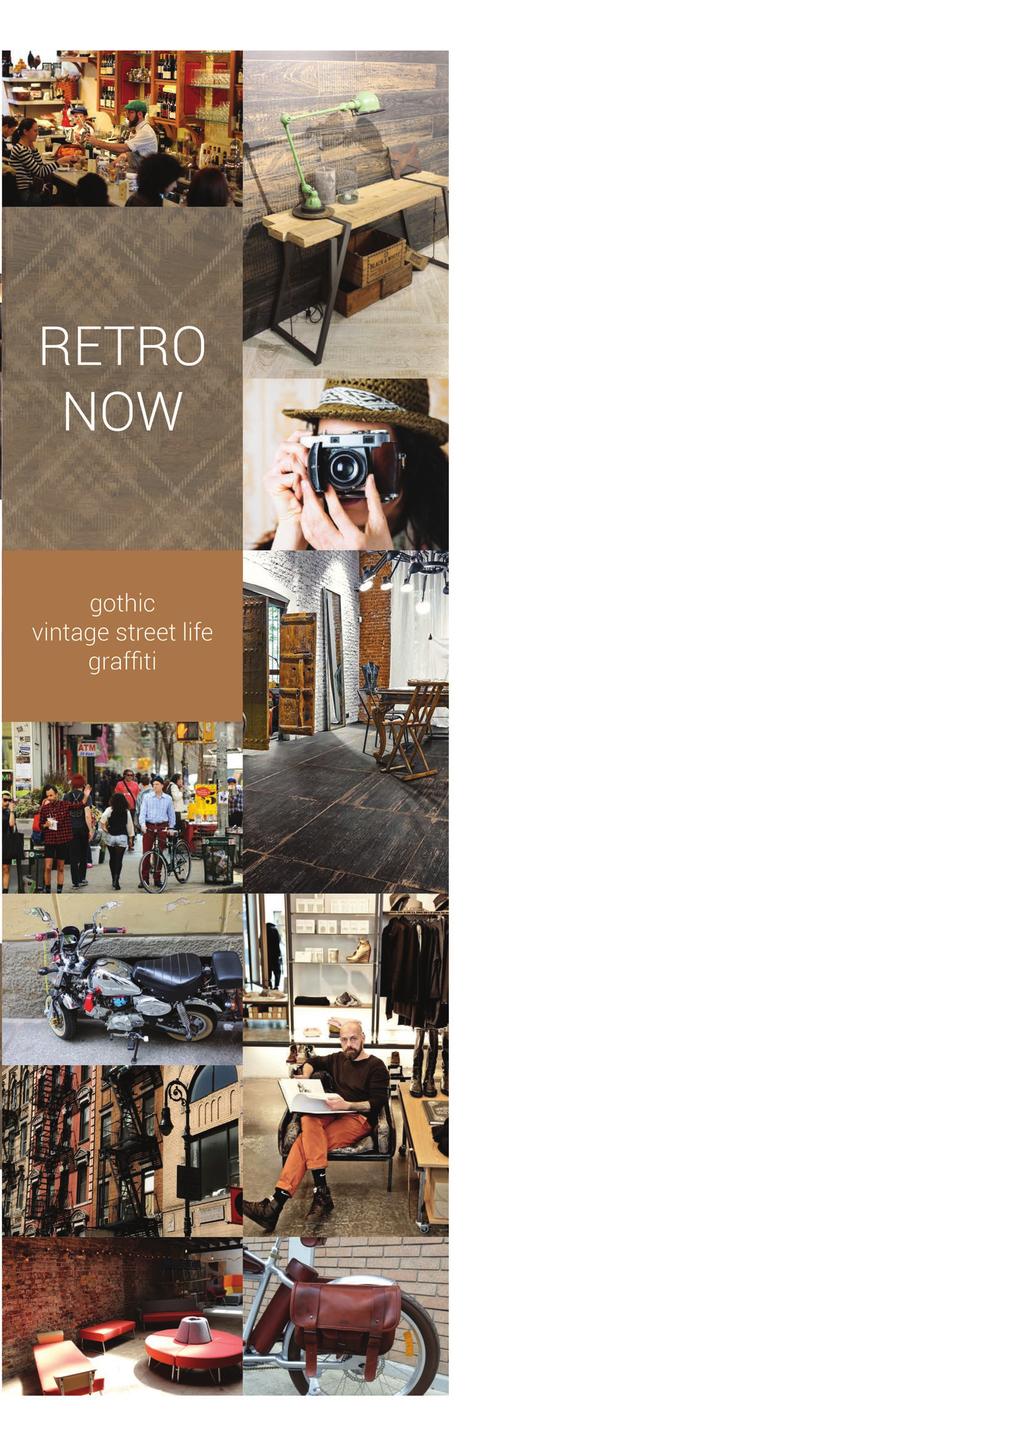 Retro Now The interesting analogy of themes is that they can often repeat themselves over the course of history. Retro considers the imitation of styles, fashions or objects that are from the past.